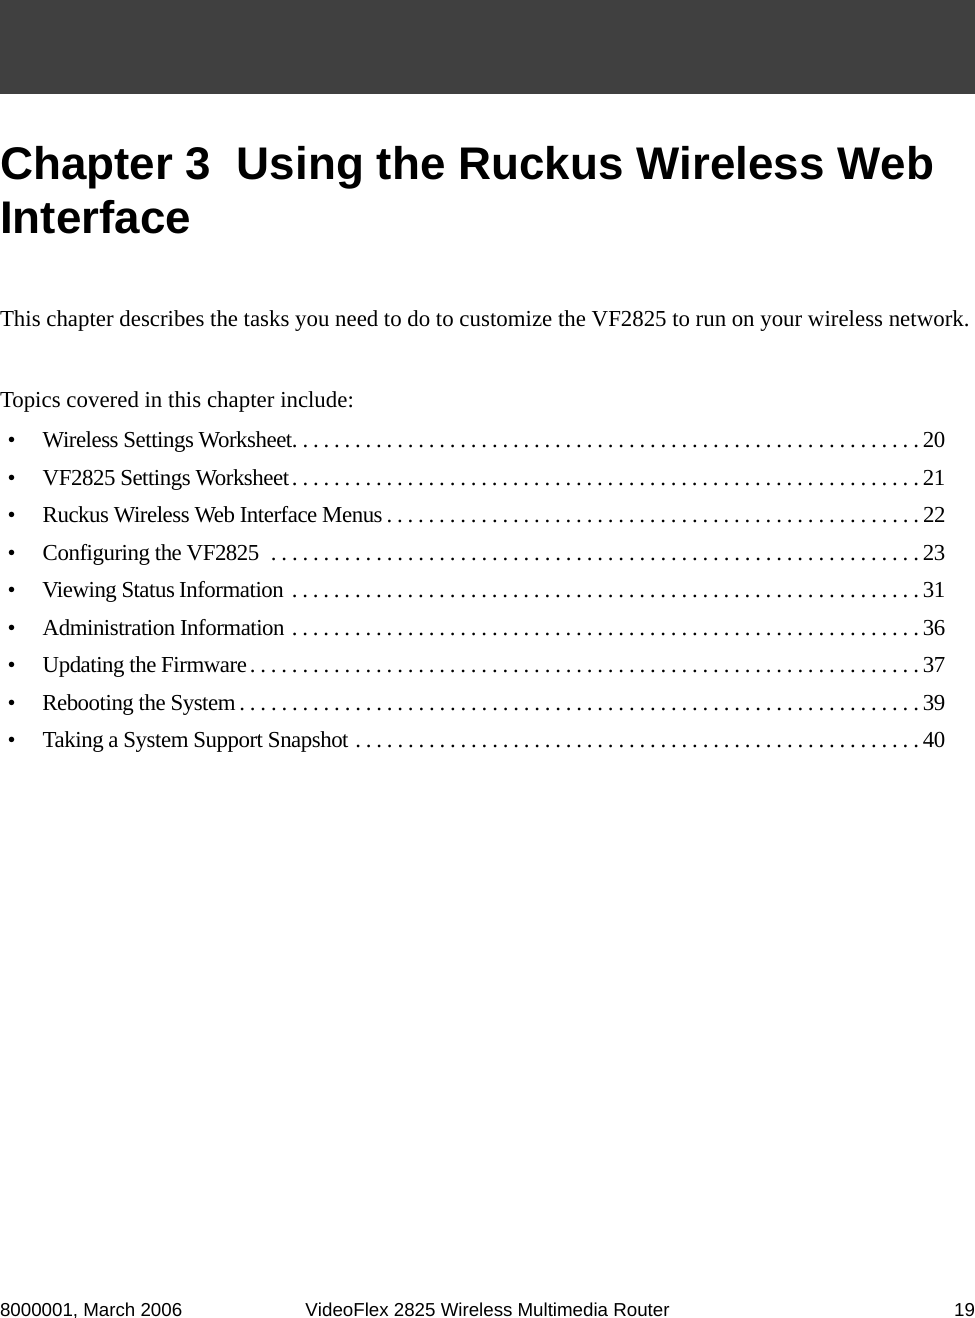 8000001, March 2006 VideoFlex 2825 Wireless Multimedia Router 19Chapter 3  Using the Ruckus Wireless Web InterfaceThis chapter describes the tasks you need to do to customize the VF2825 to run on your wireless network. Topics covered in this chapter include:•  Wireless Settings Worksheet. . . . . . . . . . . . . . . . . . . . . . . . . . . . . . . . . . . . . . . . . . . . . . . . . . . . . . . . . . . . 20•  VF2825 Settings Worksheet. . . . . . . . . . . . . . . . . . . . . . . . . . . . . . . . . . . . . . . . . . . . . . . . . . . . . . . . . . . . 21•  Ruckus Wireless Web Interface Menus . . . . . . . . . . . . . . . . . . . . . . . . . . . . . . . . . . . . . . . . . . . . . . . . . . . 22•  Configuring the VF2825  . . . . . . . . . . . . . . . . . . . . . . . . . . . . . . . . . . . . . . . . . . . . . . . . . . . . . . . . . . . . . . 23•  Viewing Status Information . . . . . . . . . . . . . . . . . . . . . . . . . . . . . . . . . . . . . . . . . . . . . . . . . . . . . . . . . . . . 31•  Administration Information . . . . . . . . . . . . . . . . . . . . . . . . . . . . . . . . . . . . . . . . . . . . . . . . . . . . . . . . . . . . 36•  Updating the Firmware. . . . . . . . . . . . . . . . . . . . . . . . . . . . . . . . . . . . . . . . . . . . . . . . . . . . . . . . . . . . . . . . 37•  Rebooting the System . . . . . . . . . . . . . . . . . . . . . . . . . . . . . . . . . . . . . . . . . . . . . . . . . . . . . . . . . . . . . . . . . 39•  Taking a System Support Snapshot . . . . . . . . . . . . . . . . . . . . . . . . . . . . . . . . . . . . . . . . . . . . . . . . . . . . . . 40